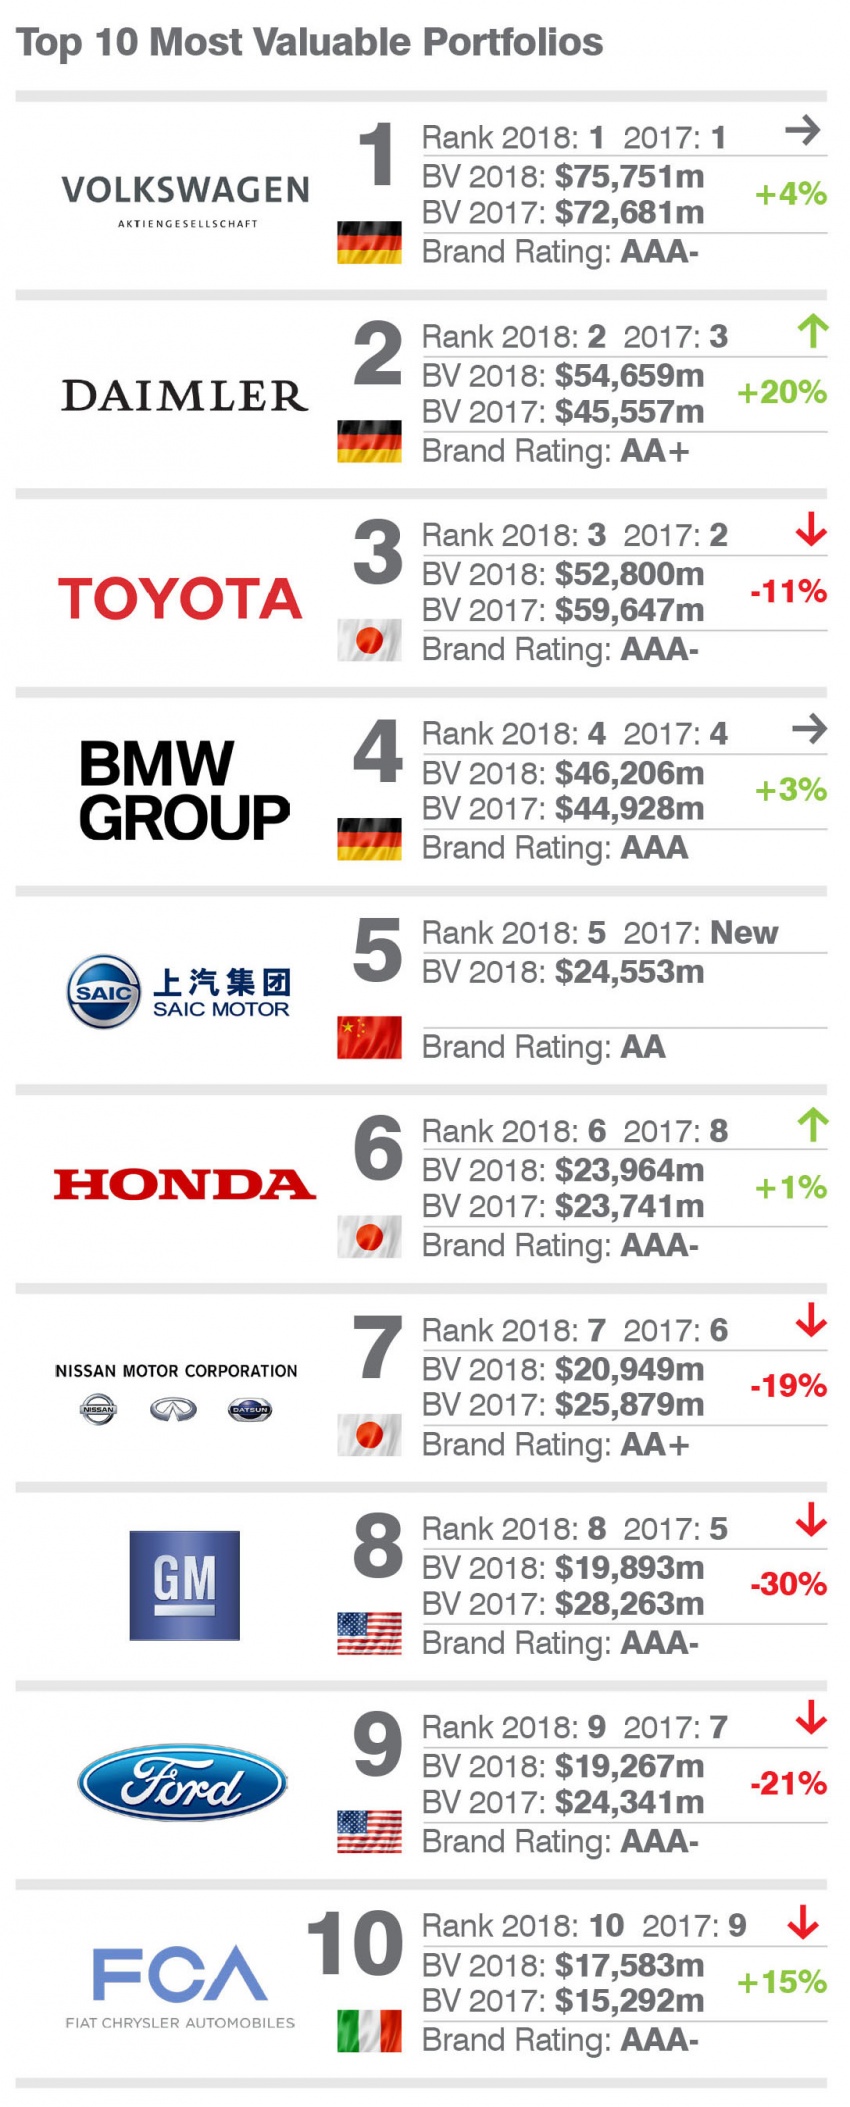 Mercedes-Benz is the world’s most valuable car brand, Ferrari the strongest brand – Brand Finance report 789632